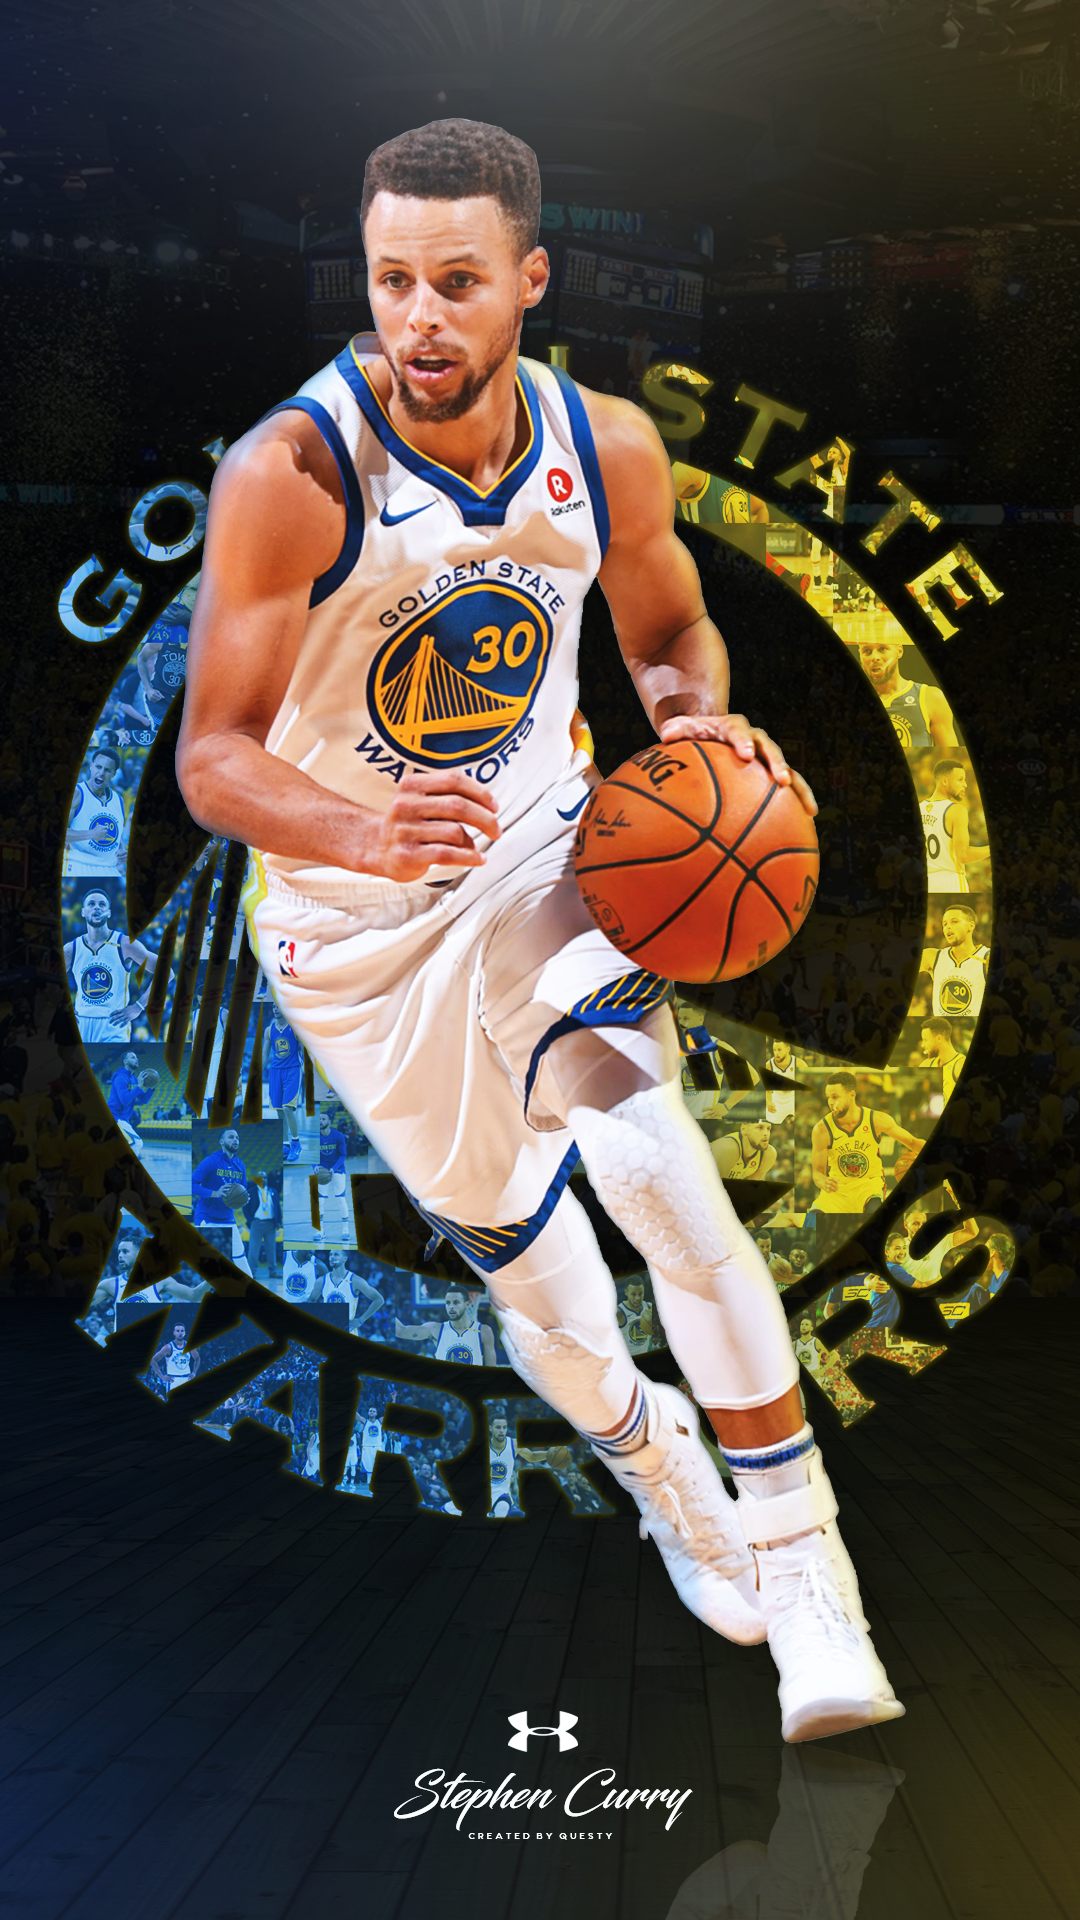 Stephen Curry Wallpaper 1080p Hupages Download iPhone Wallpaper. Stephen curry wallpaper, Nba stephen curry, Stephen curry